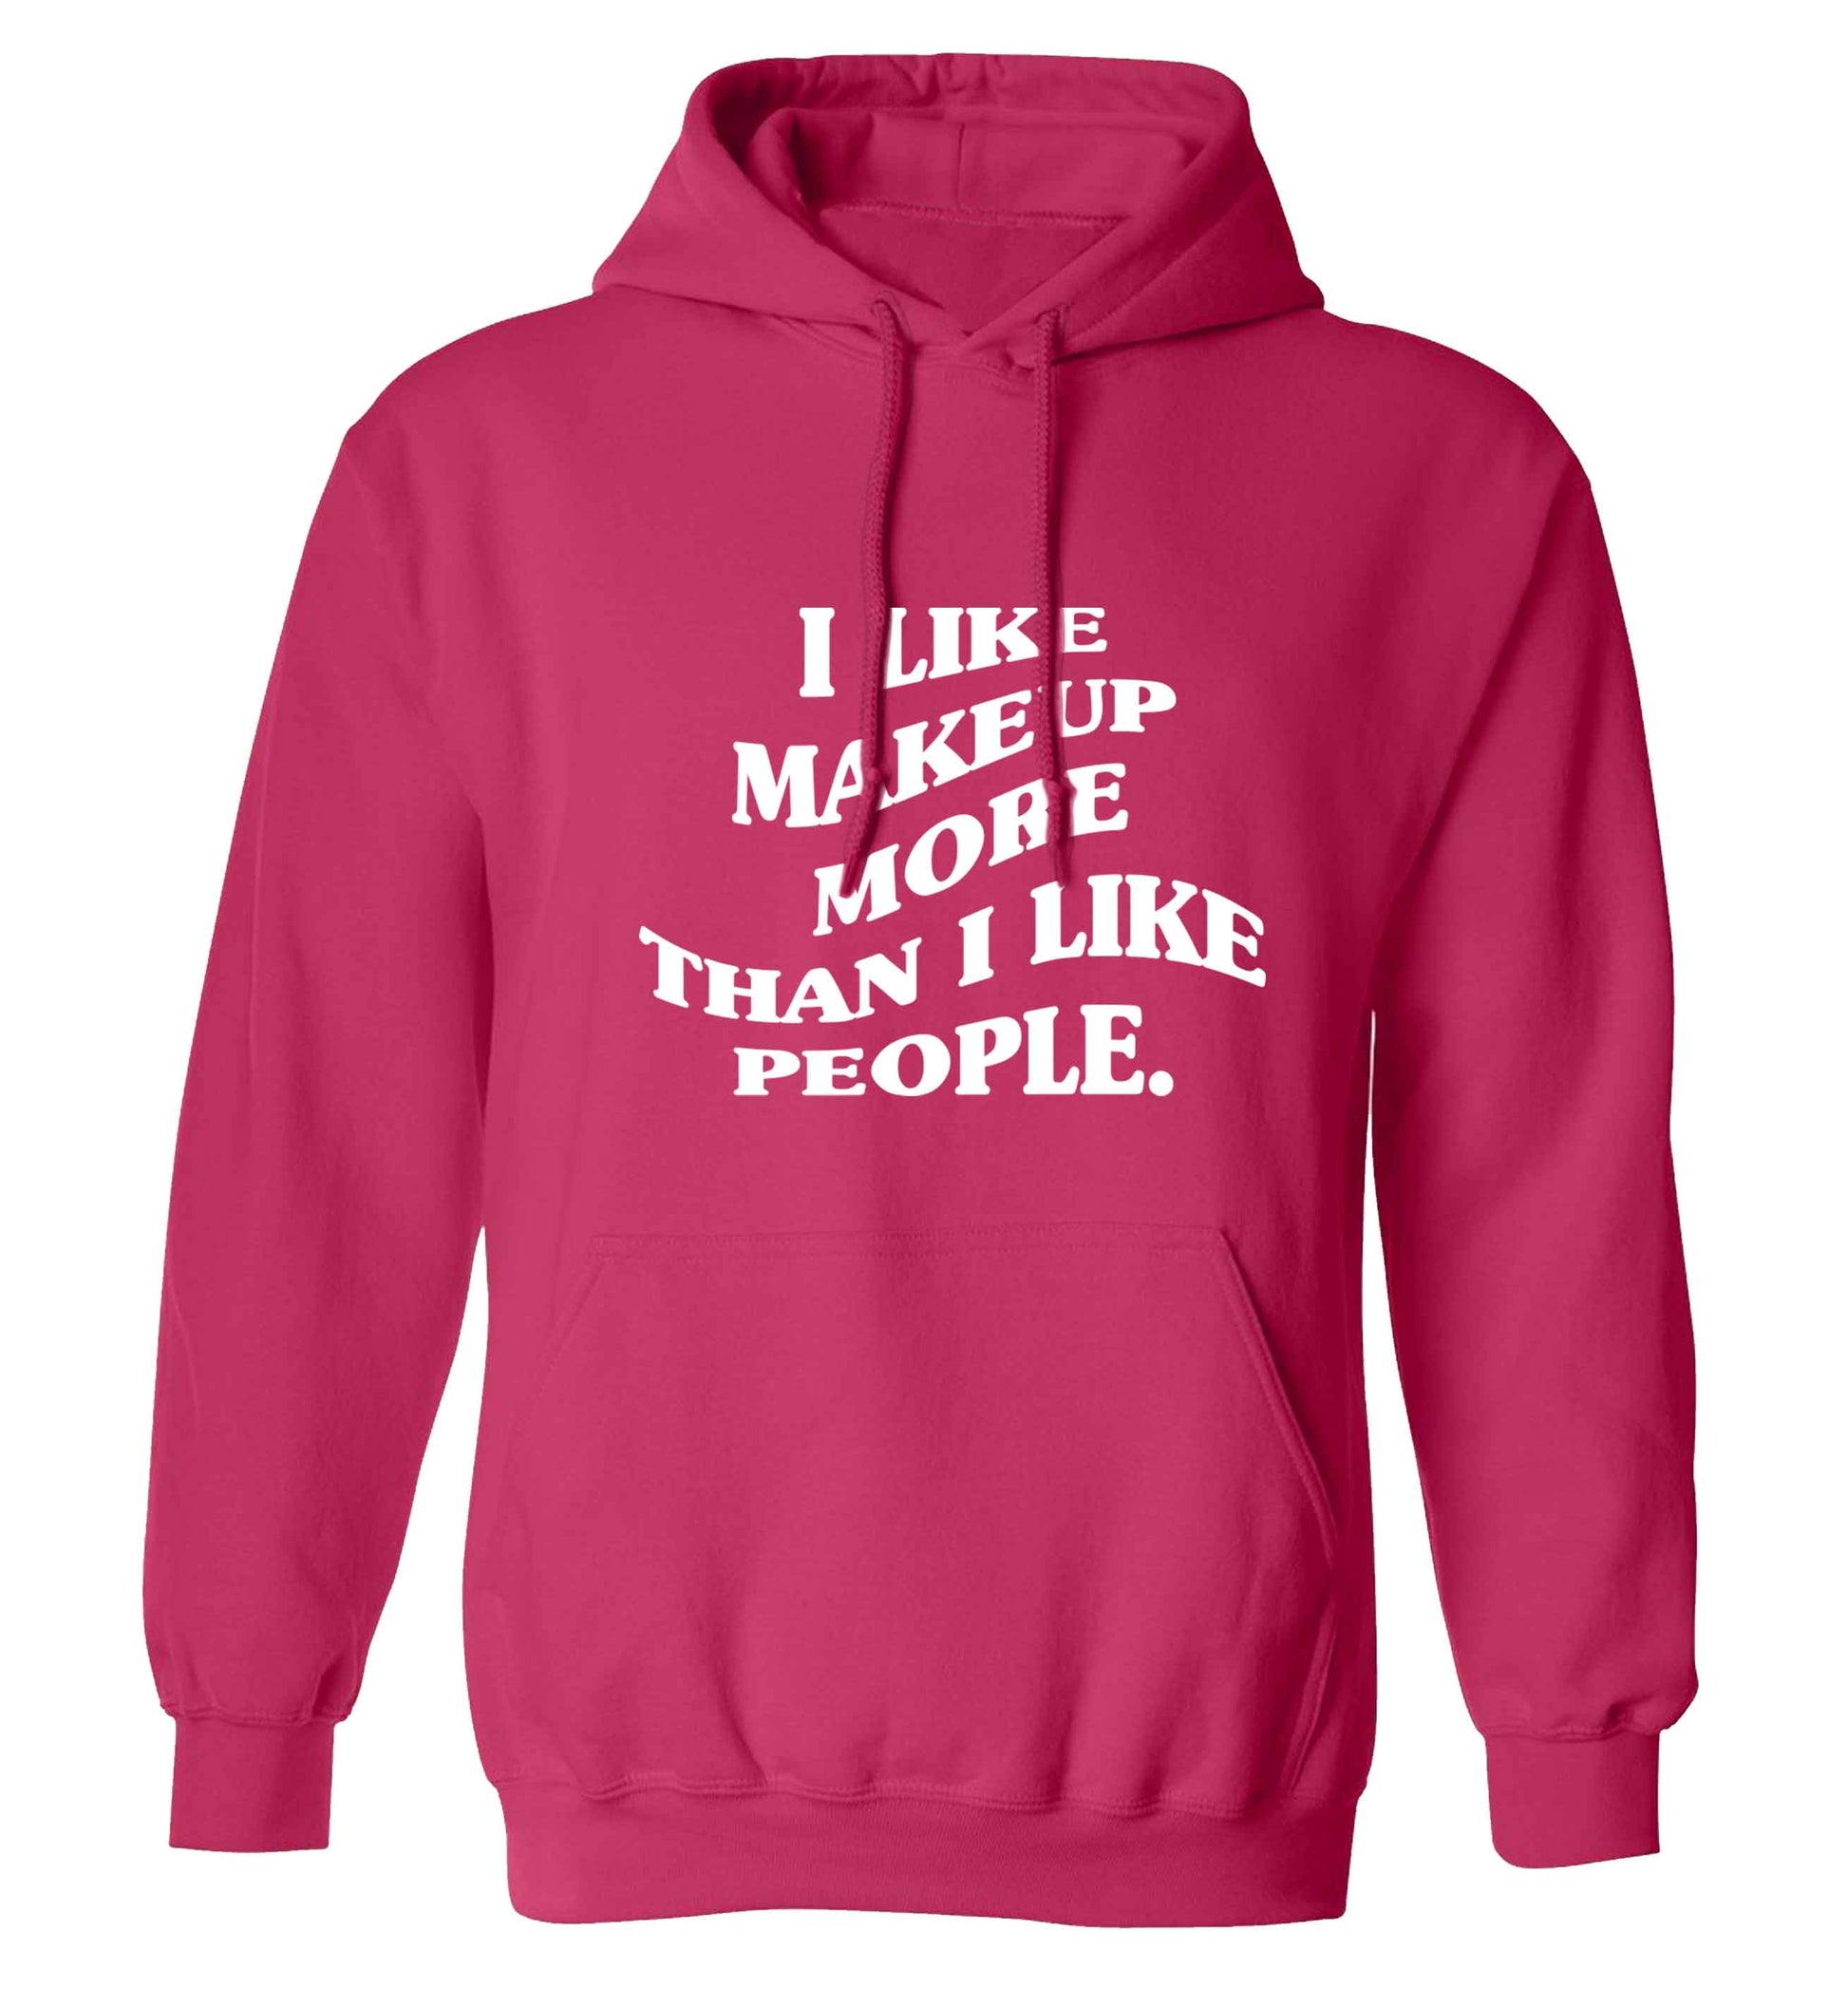 I like makeup more than people adults unisex pink hoodie 2XL